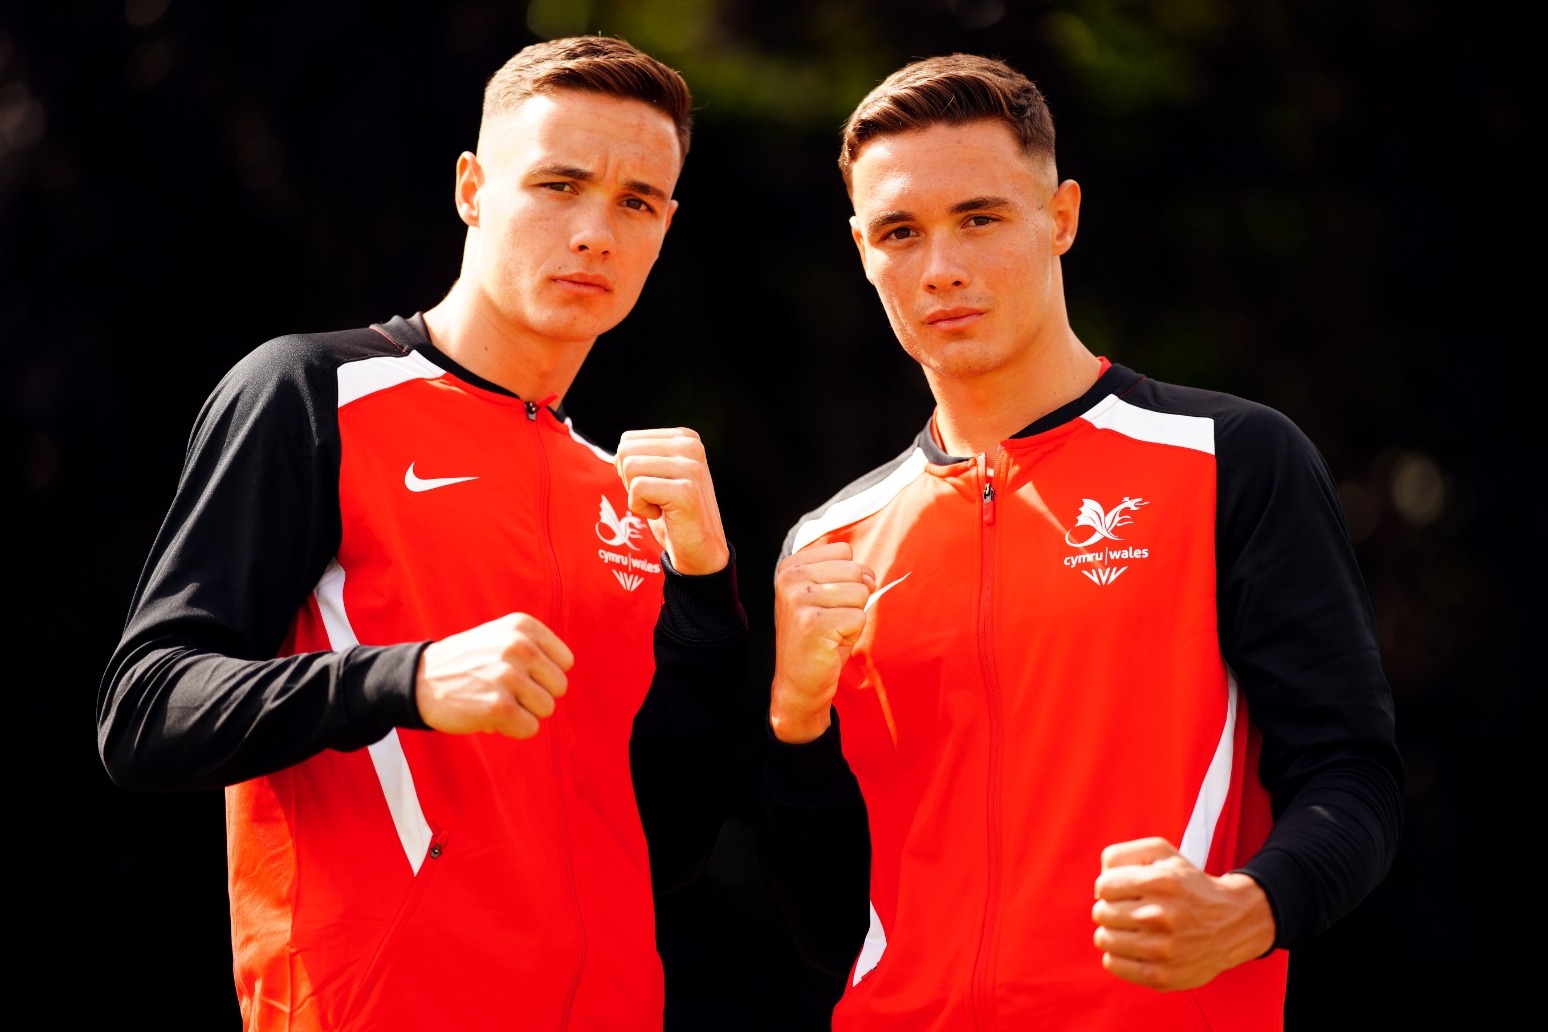 Identical twins ready to make opponents see double at Commonwealth Games 